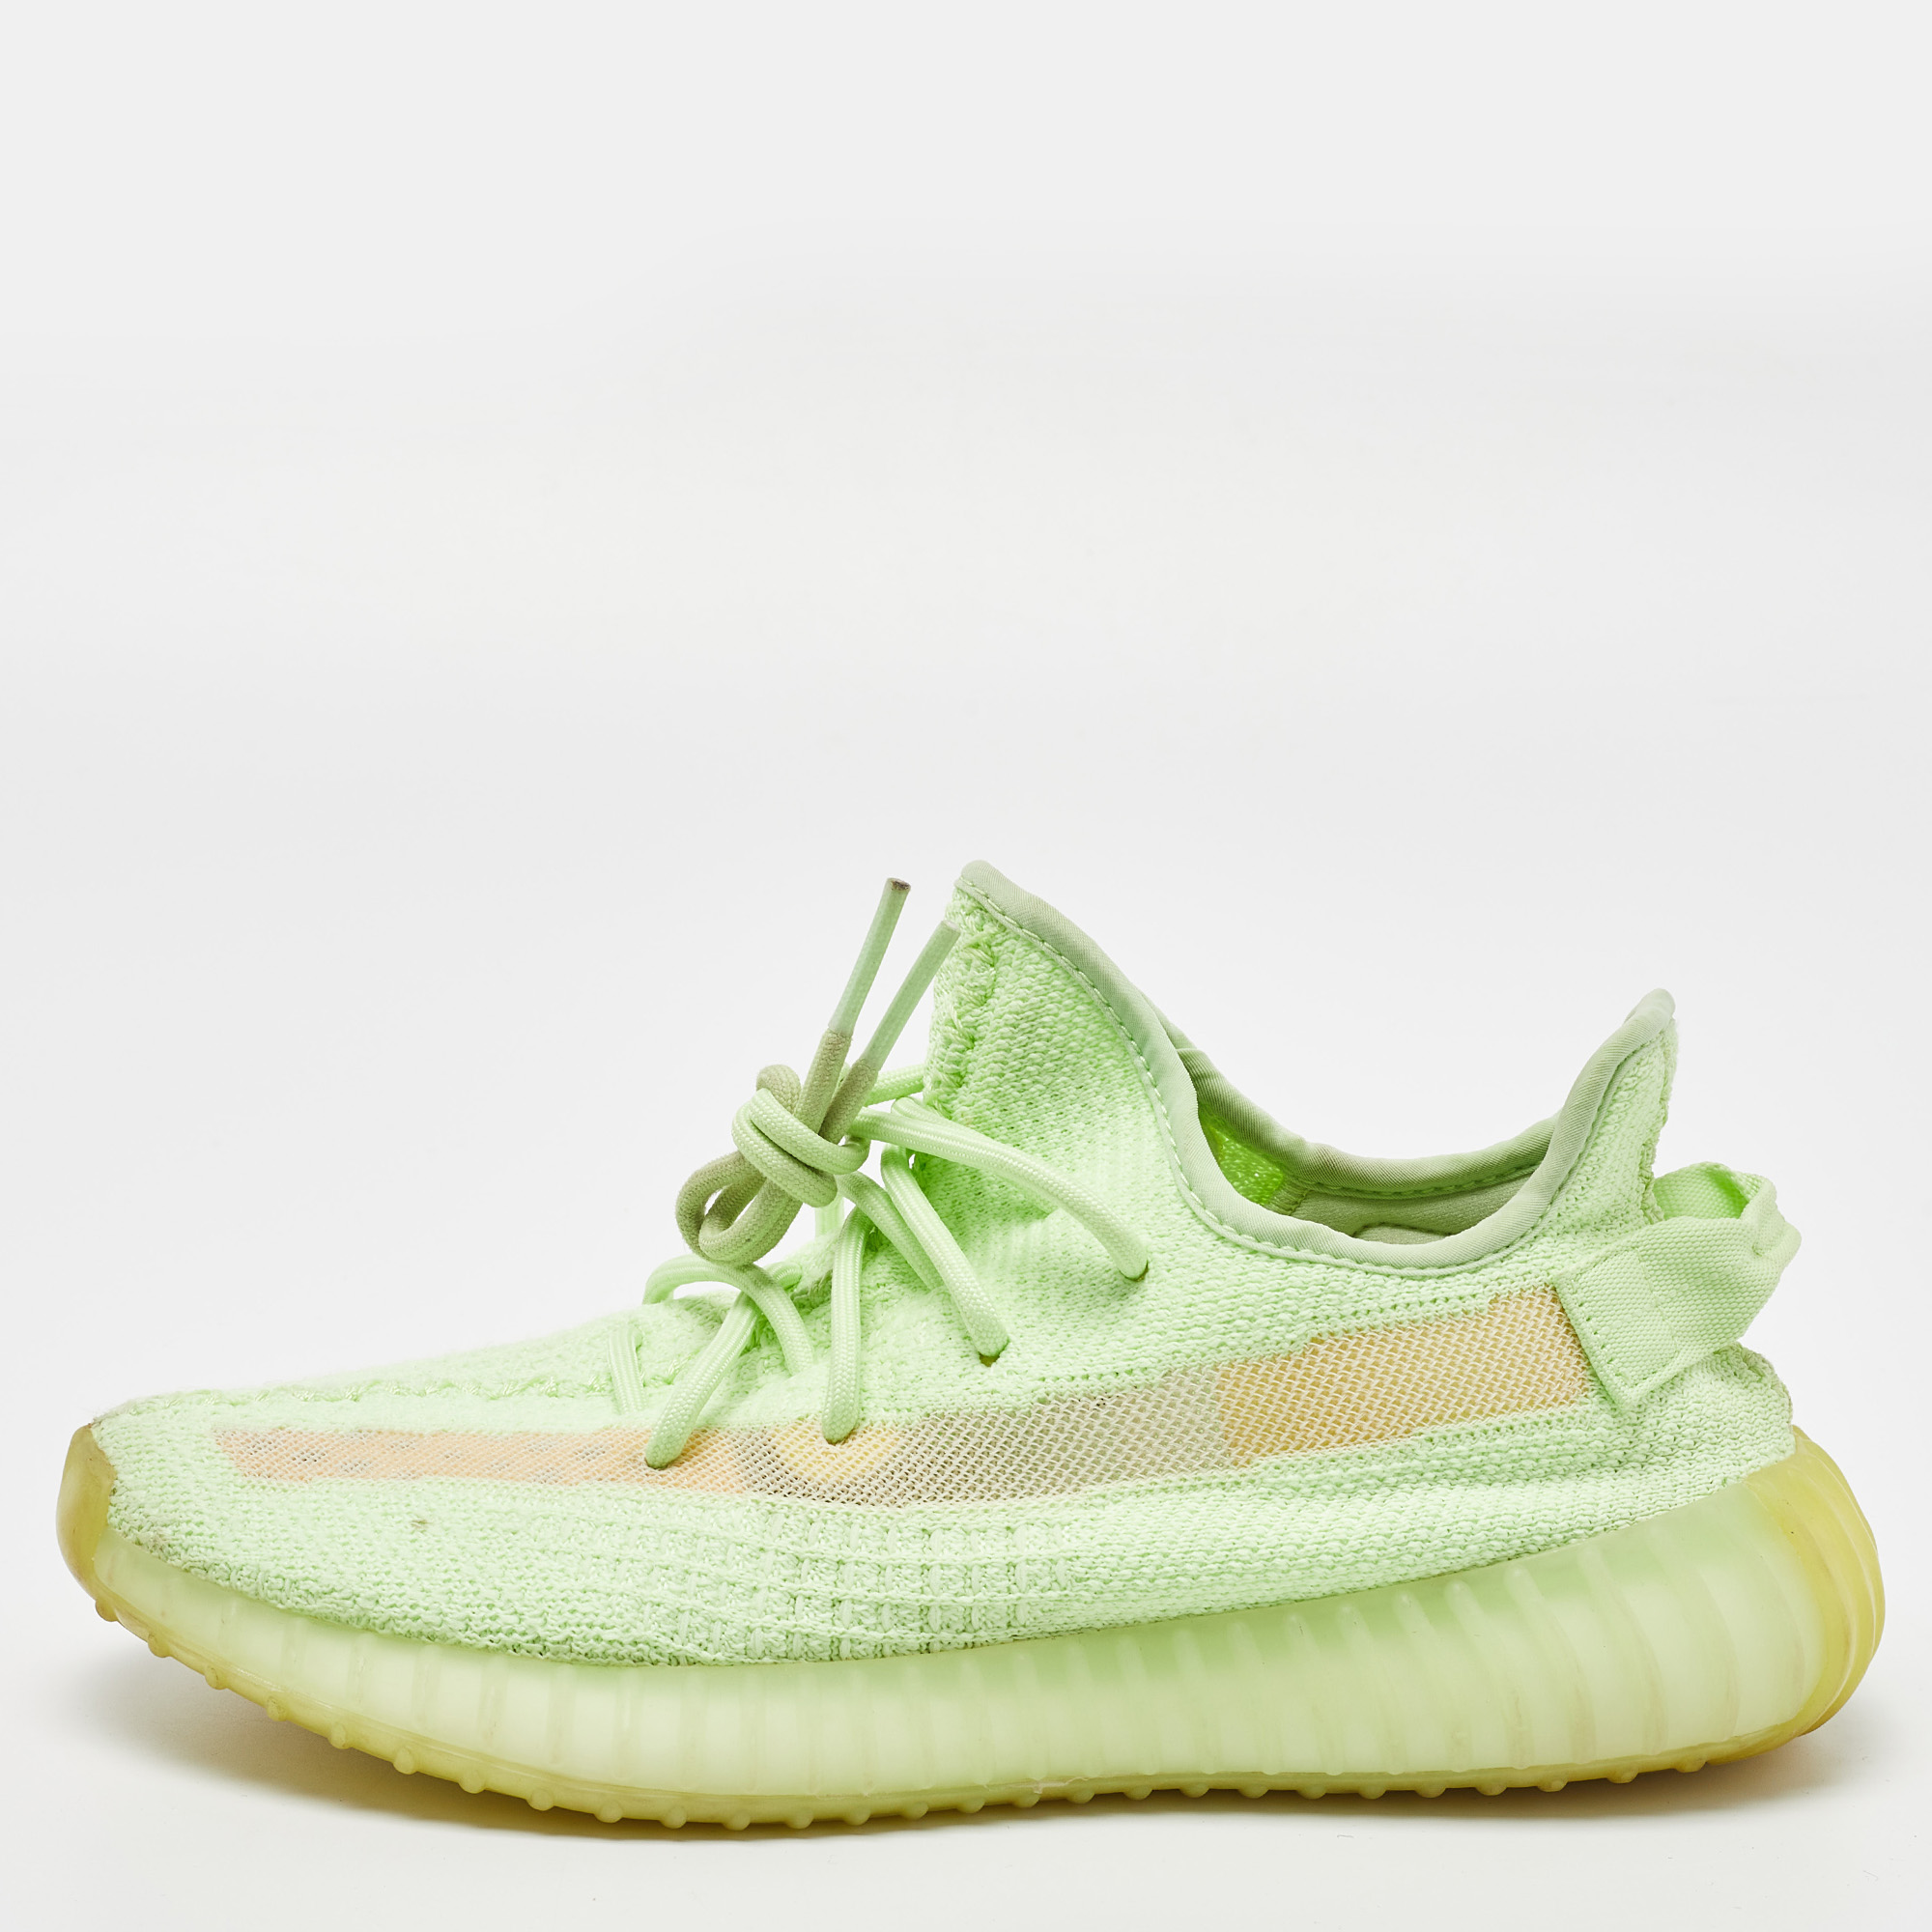 

Yeezy x Adidas Green Knit Fabric Boost 350 V2 "GID' Glow Sneakers Size 40 2/3